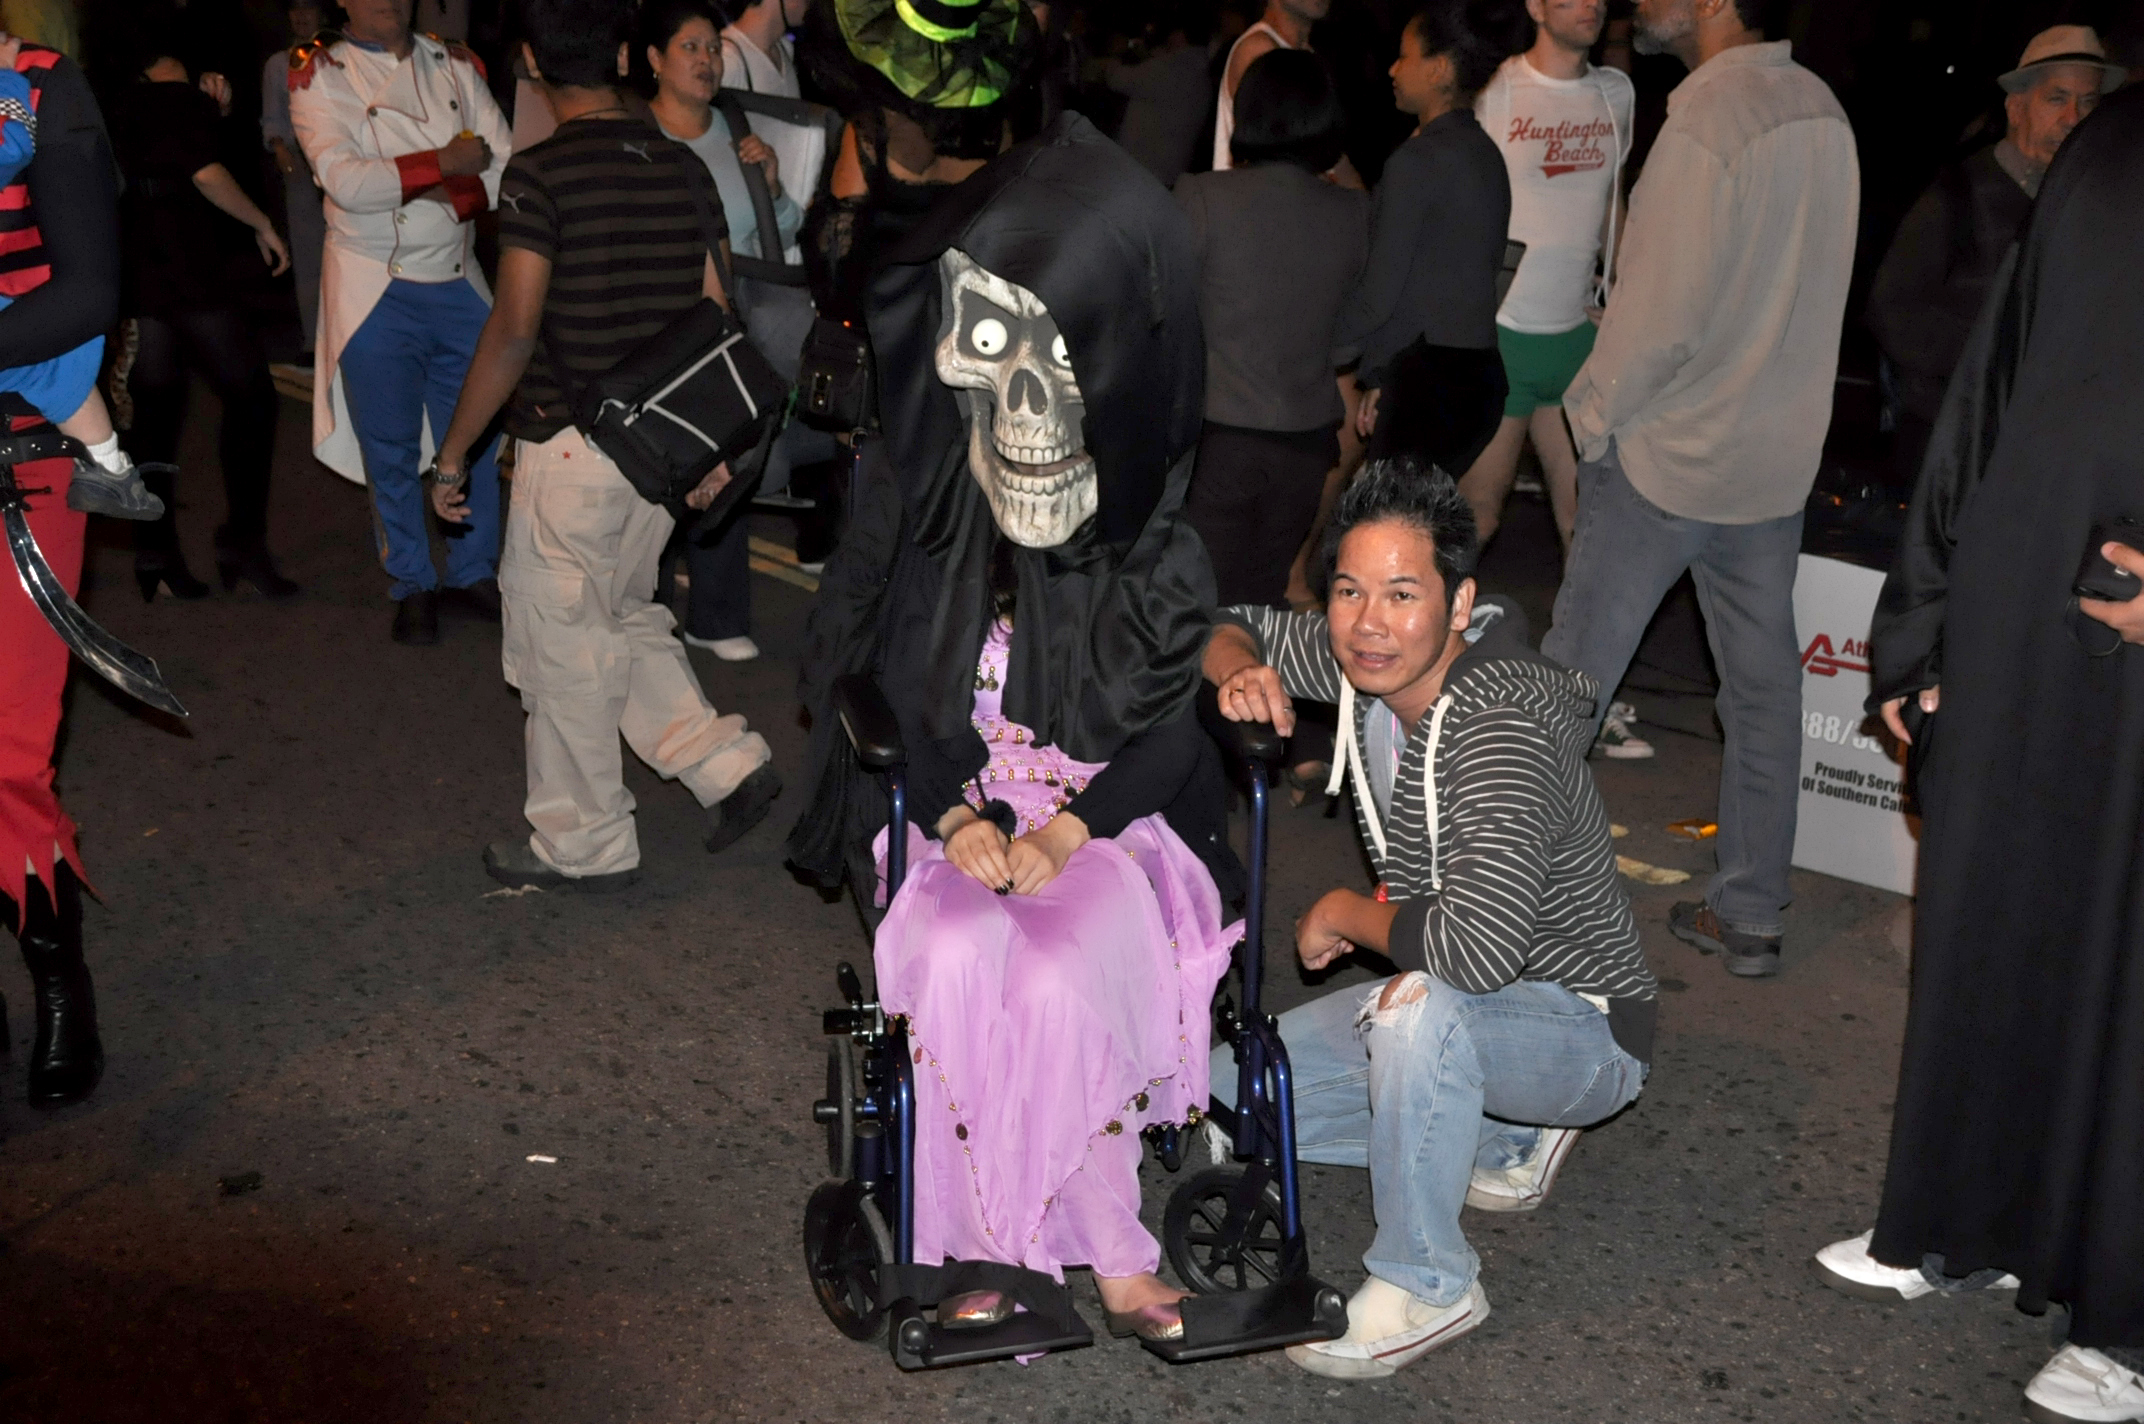 a man dressed as grim in costume poses next to a skeleton